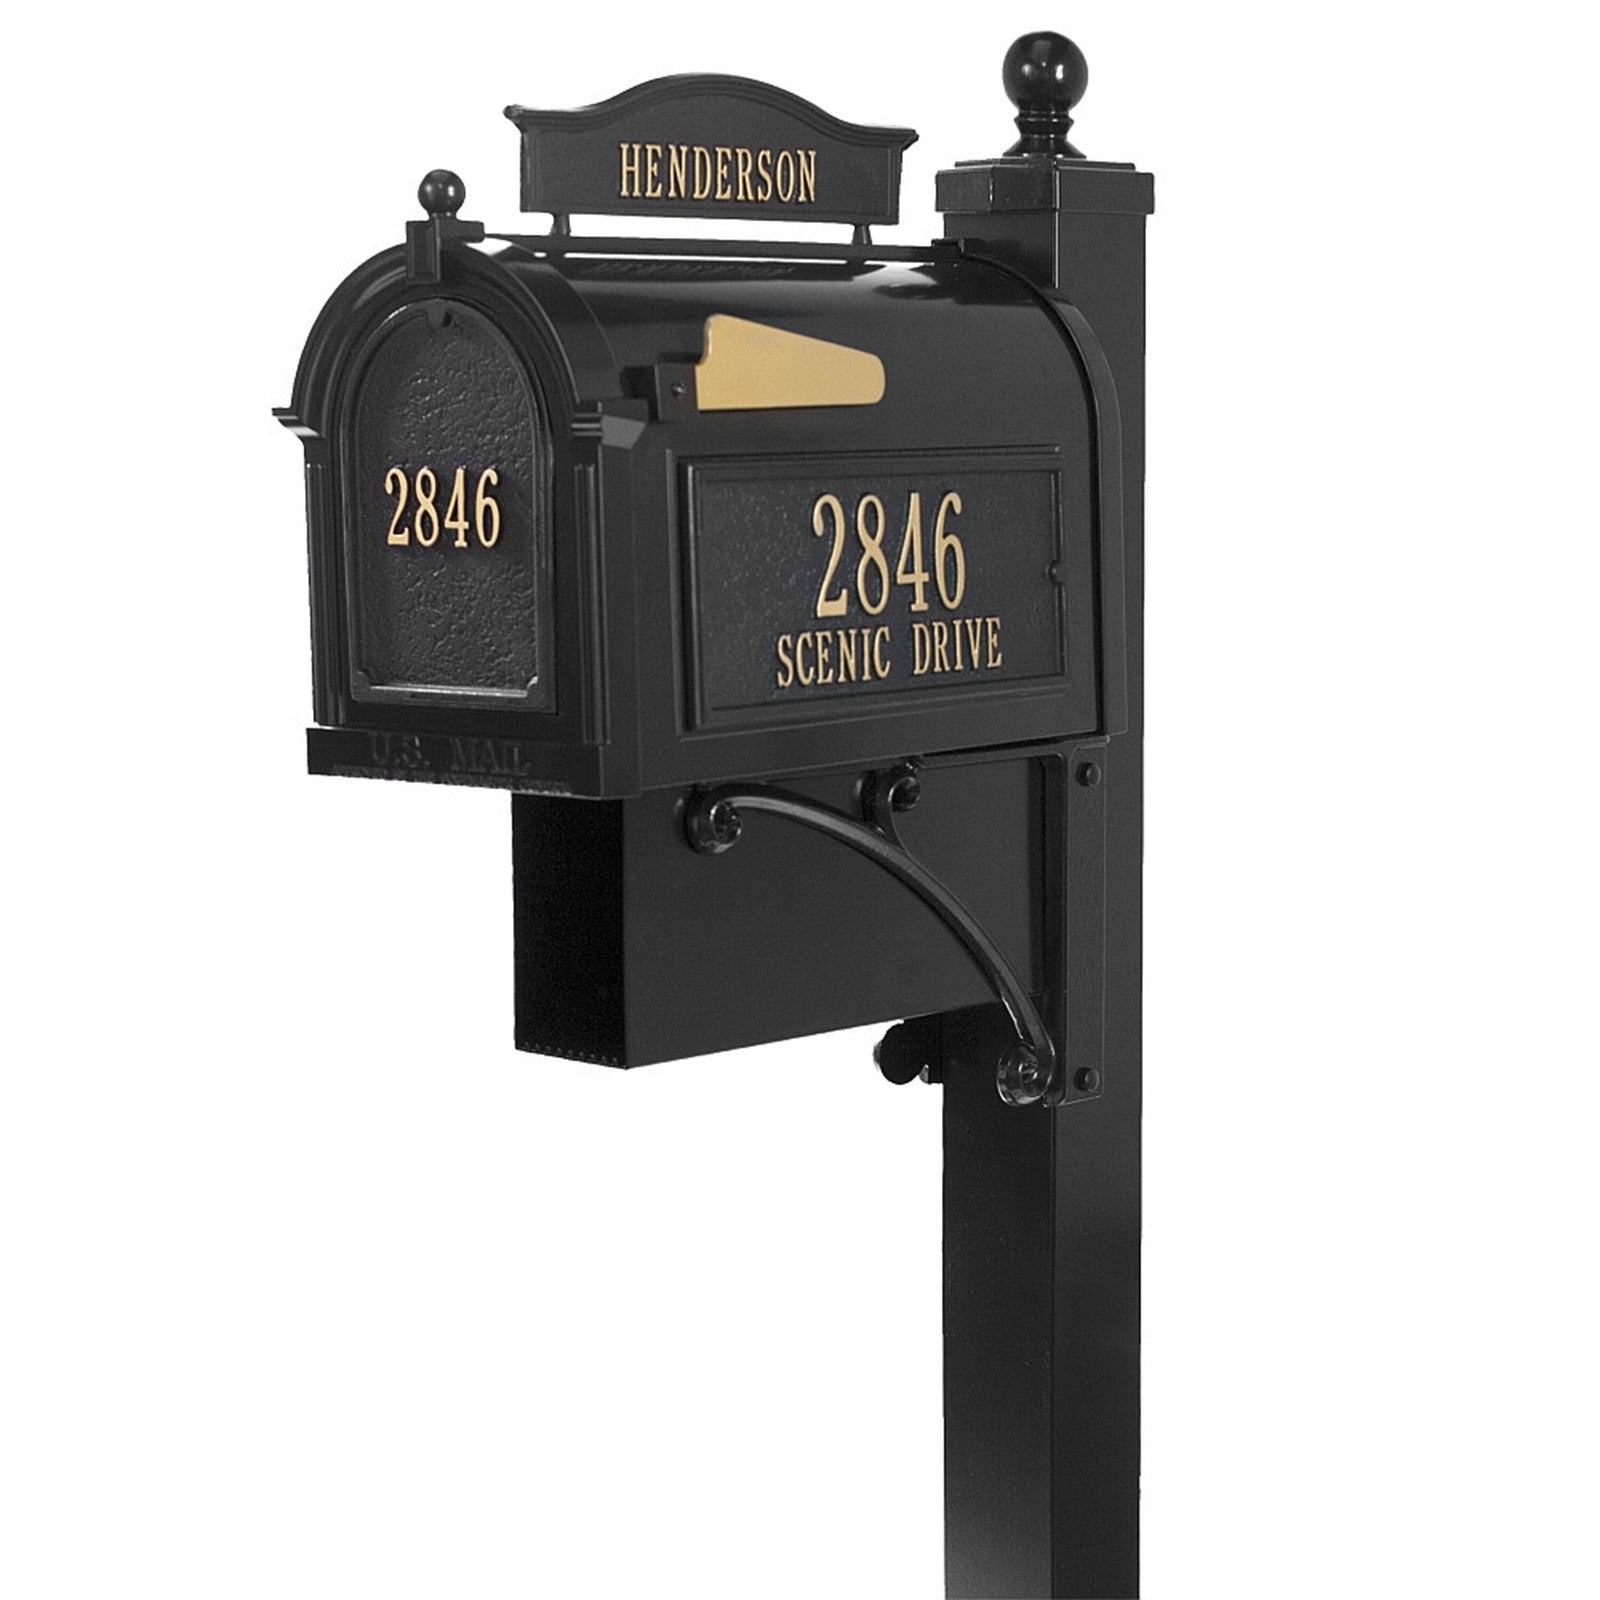 10x20 LARGE Mailbox Letters SET OF 2 Name Number & Street Name Custom  Mailbox